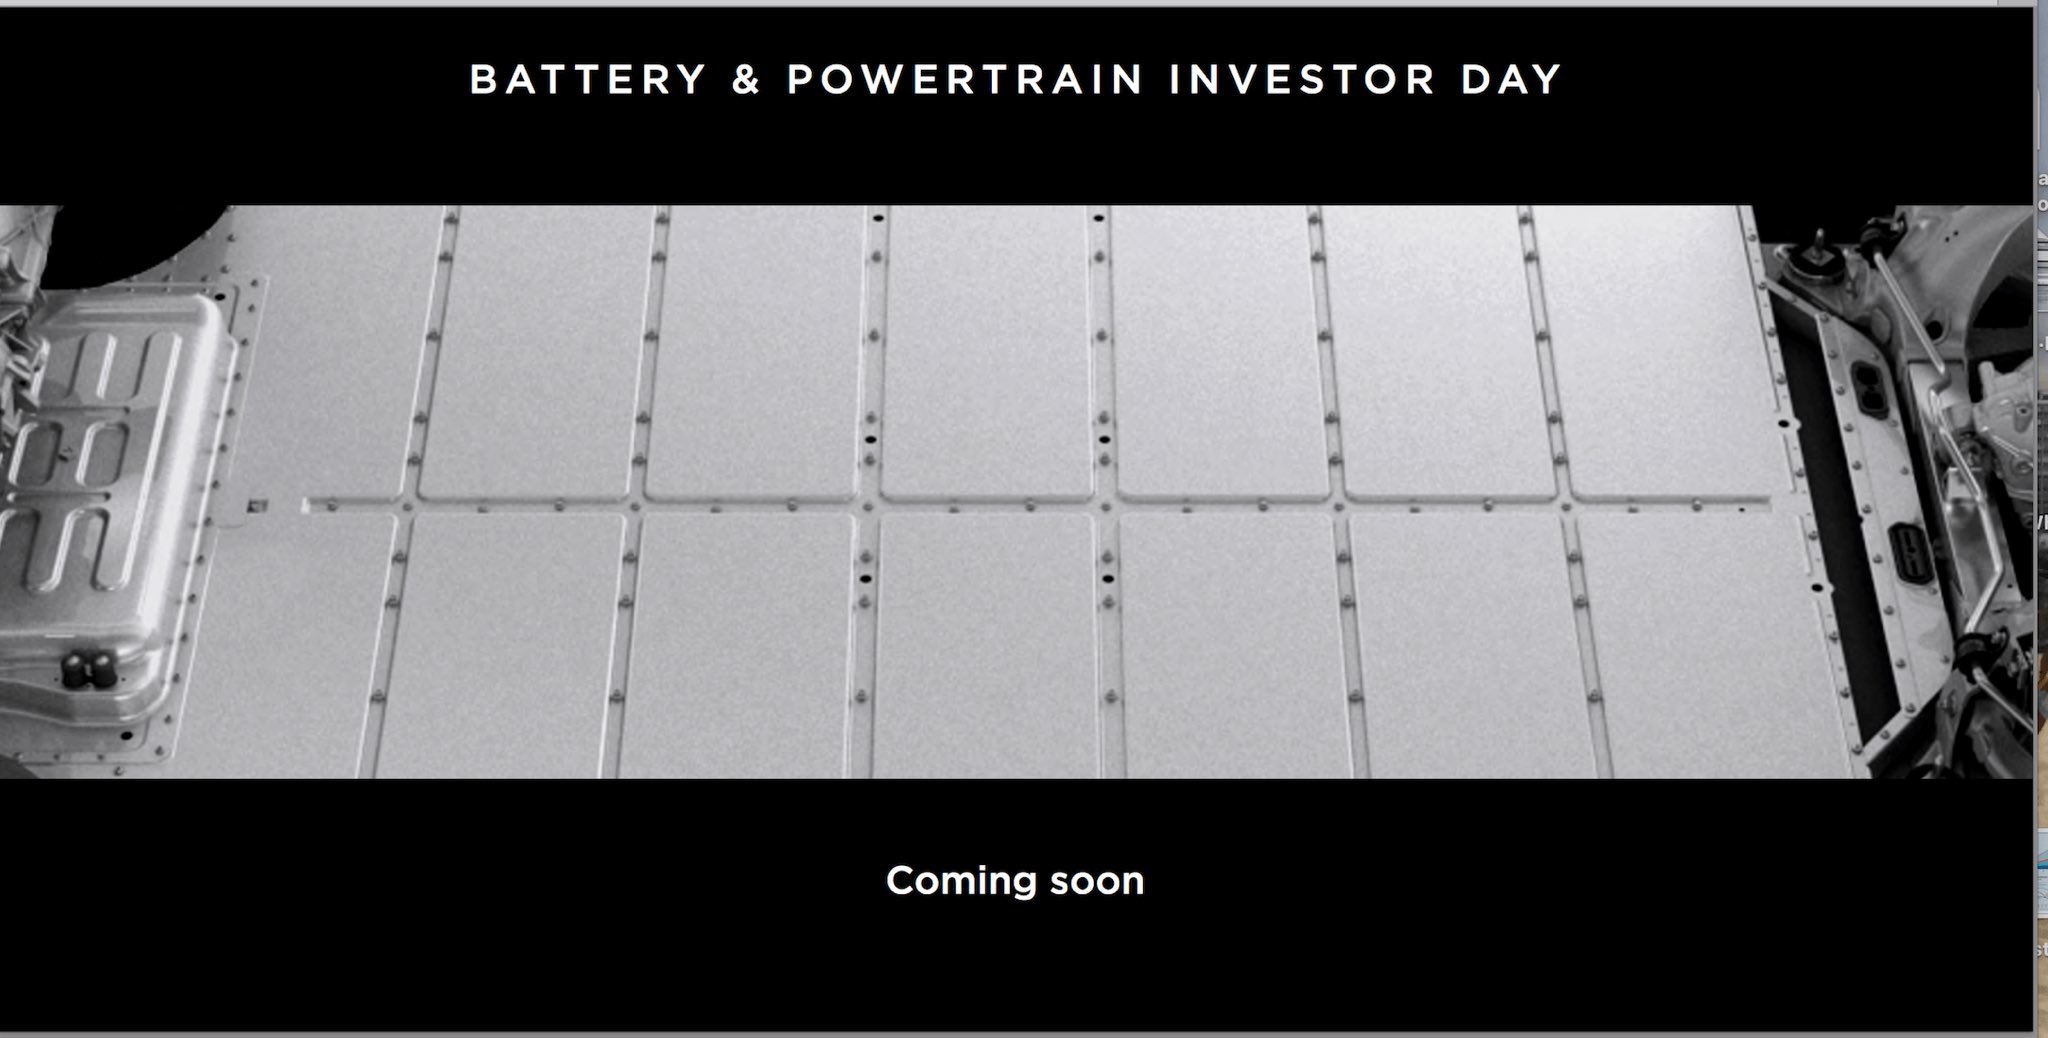 vincentyu.eth on Twitter: "And the Tesla &amp; Powertrain Investor Day is coming soon around 2020 https://t.co/baPBzGx0yg" / Twitter